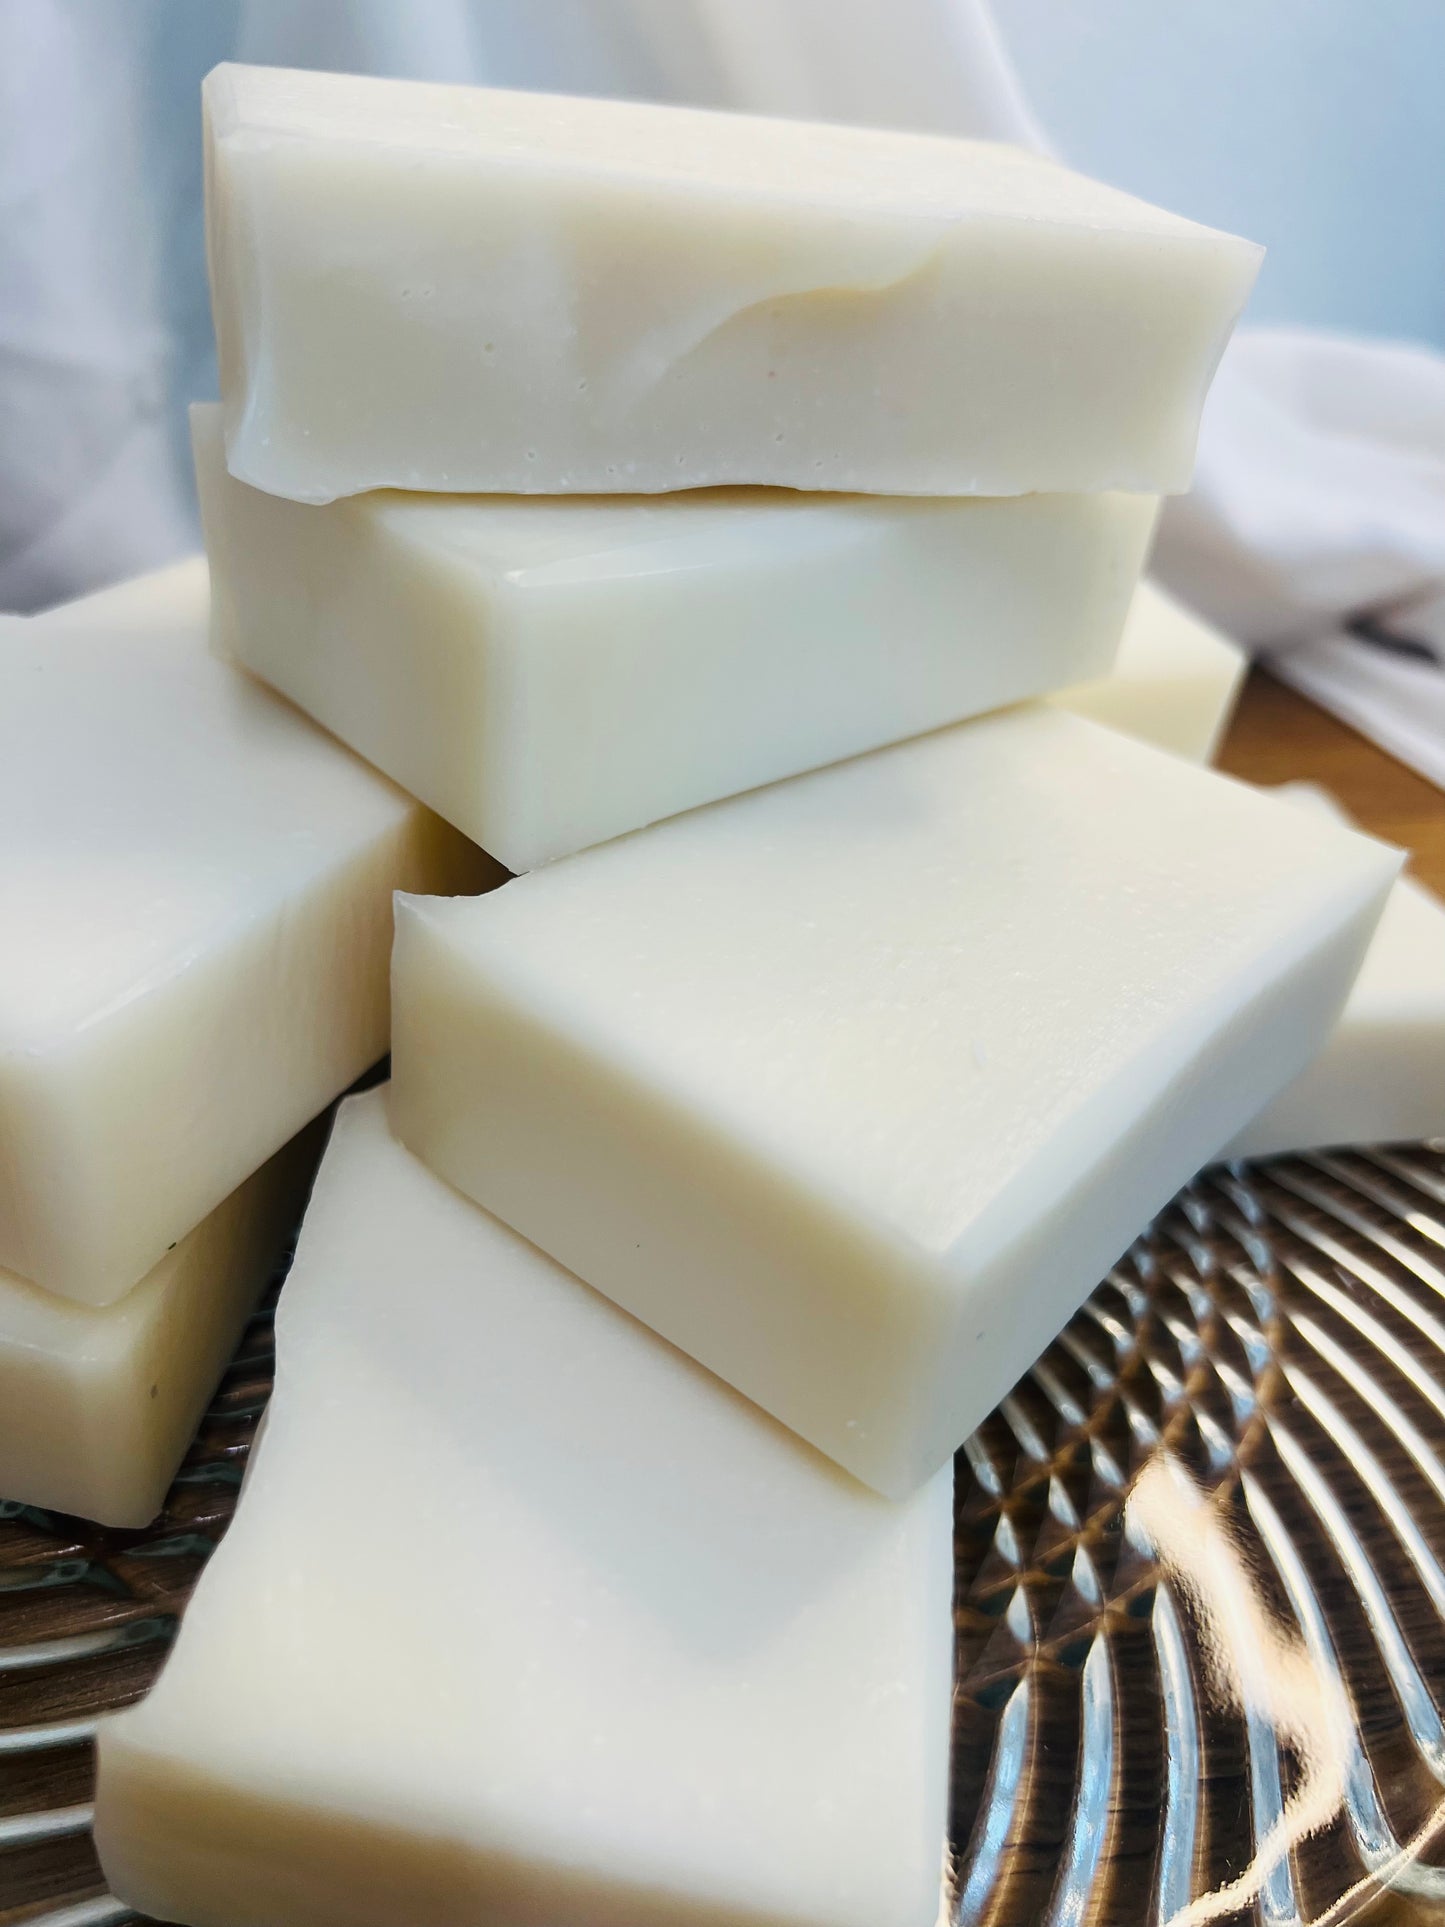 Unscented Tallow soap